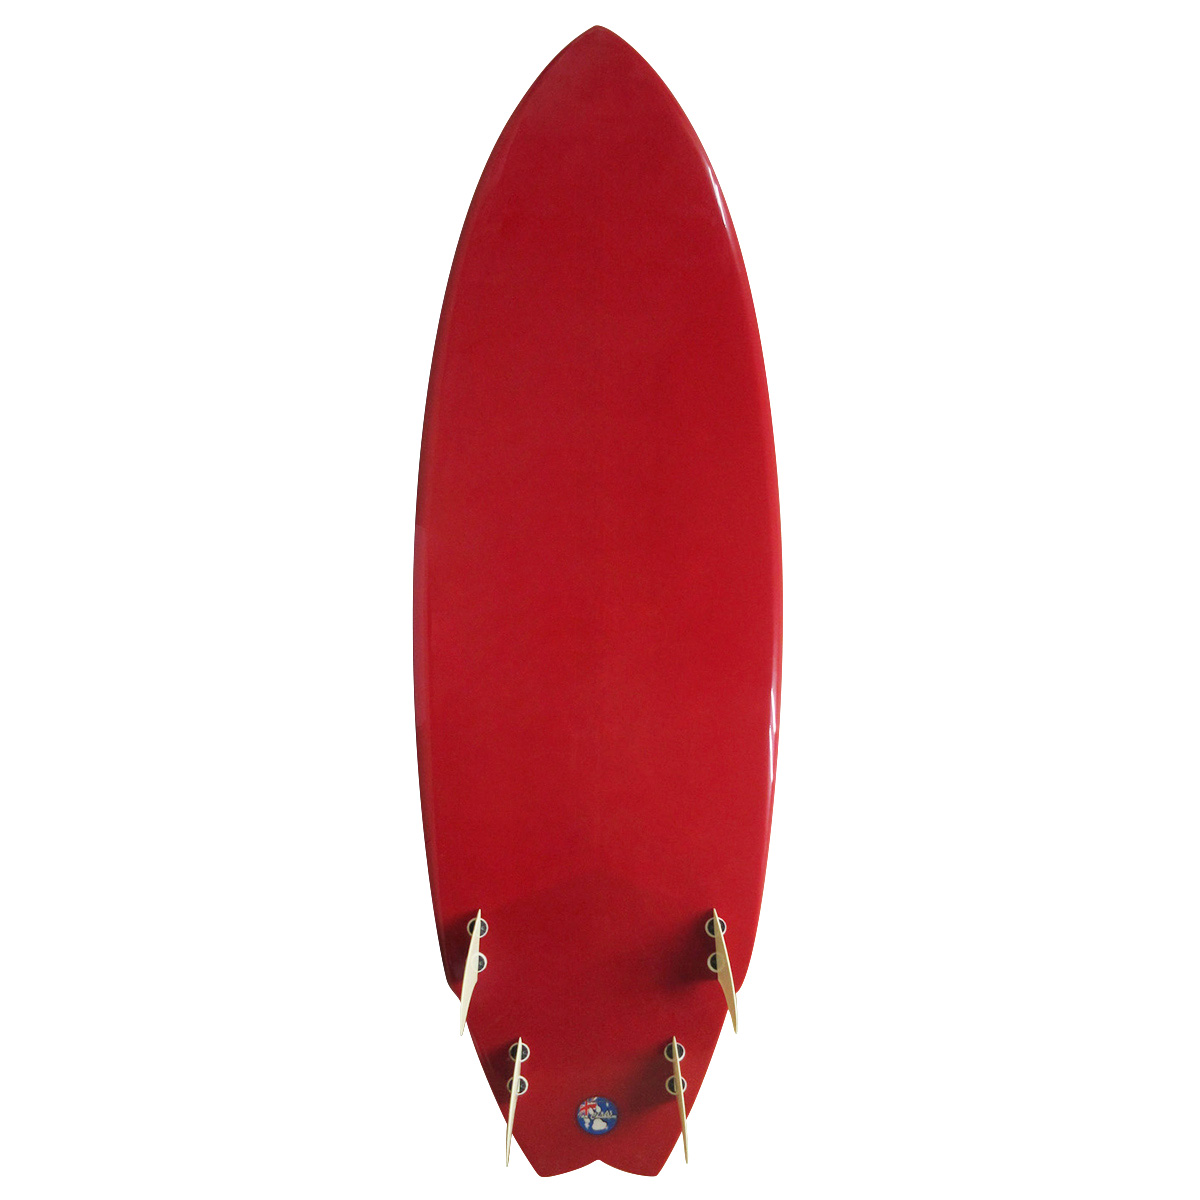 SOUTH COAST SURFBOARDS / Wing Swallow 5'10